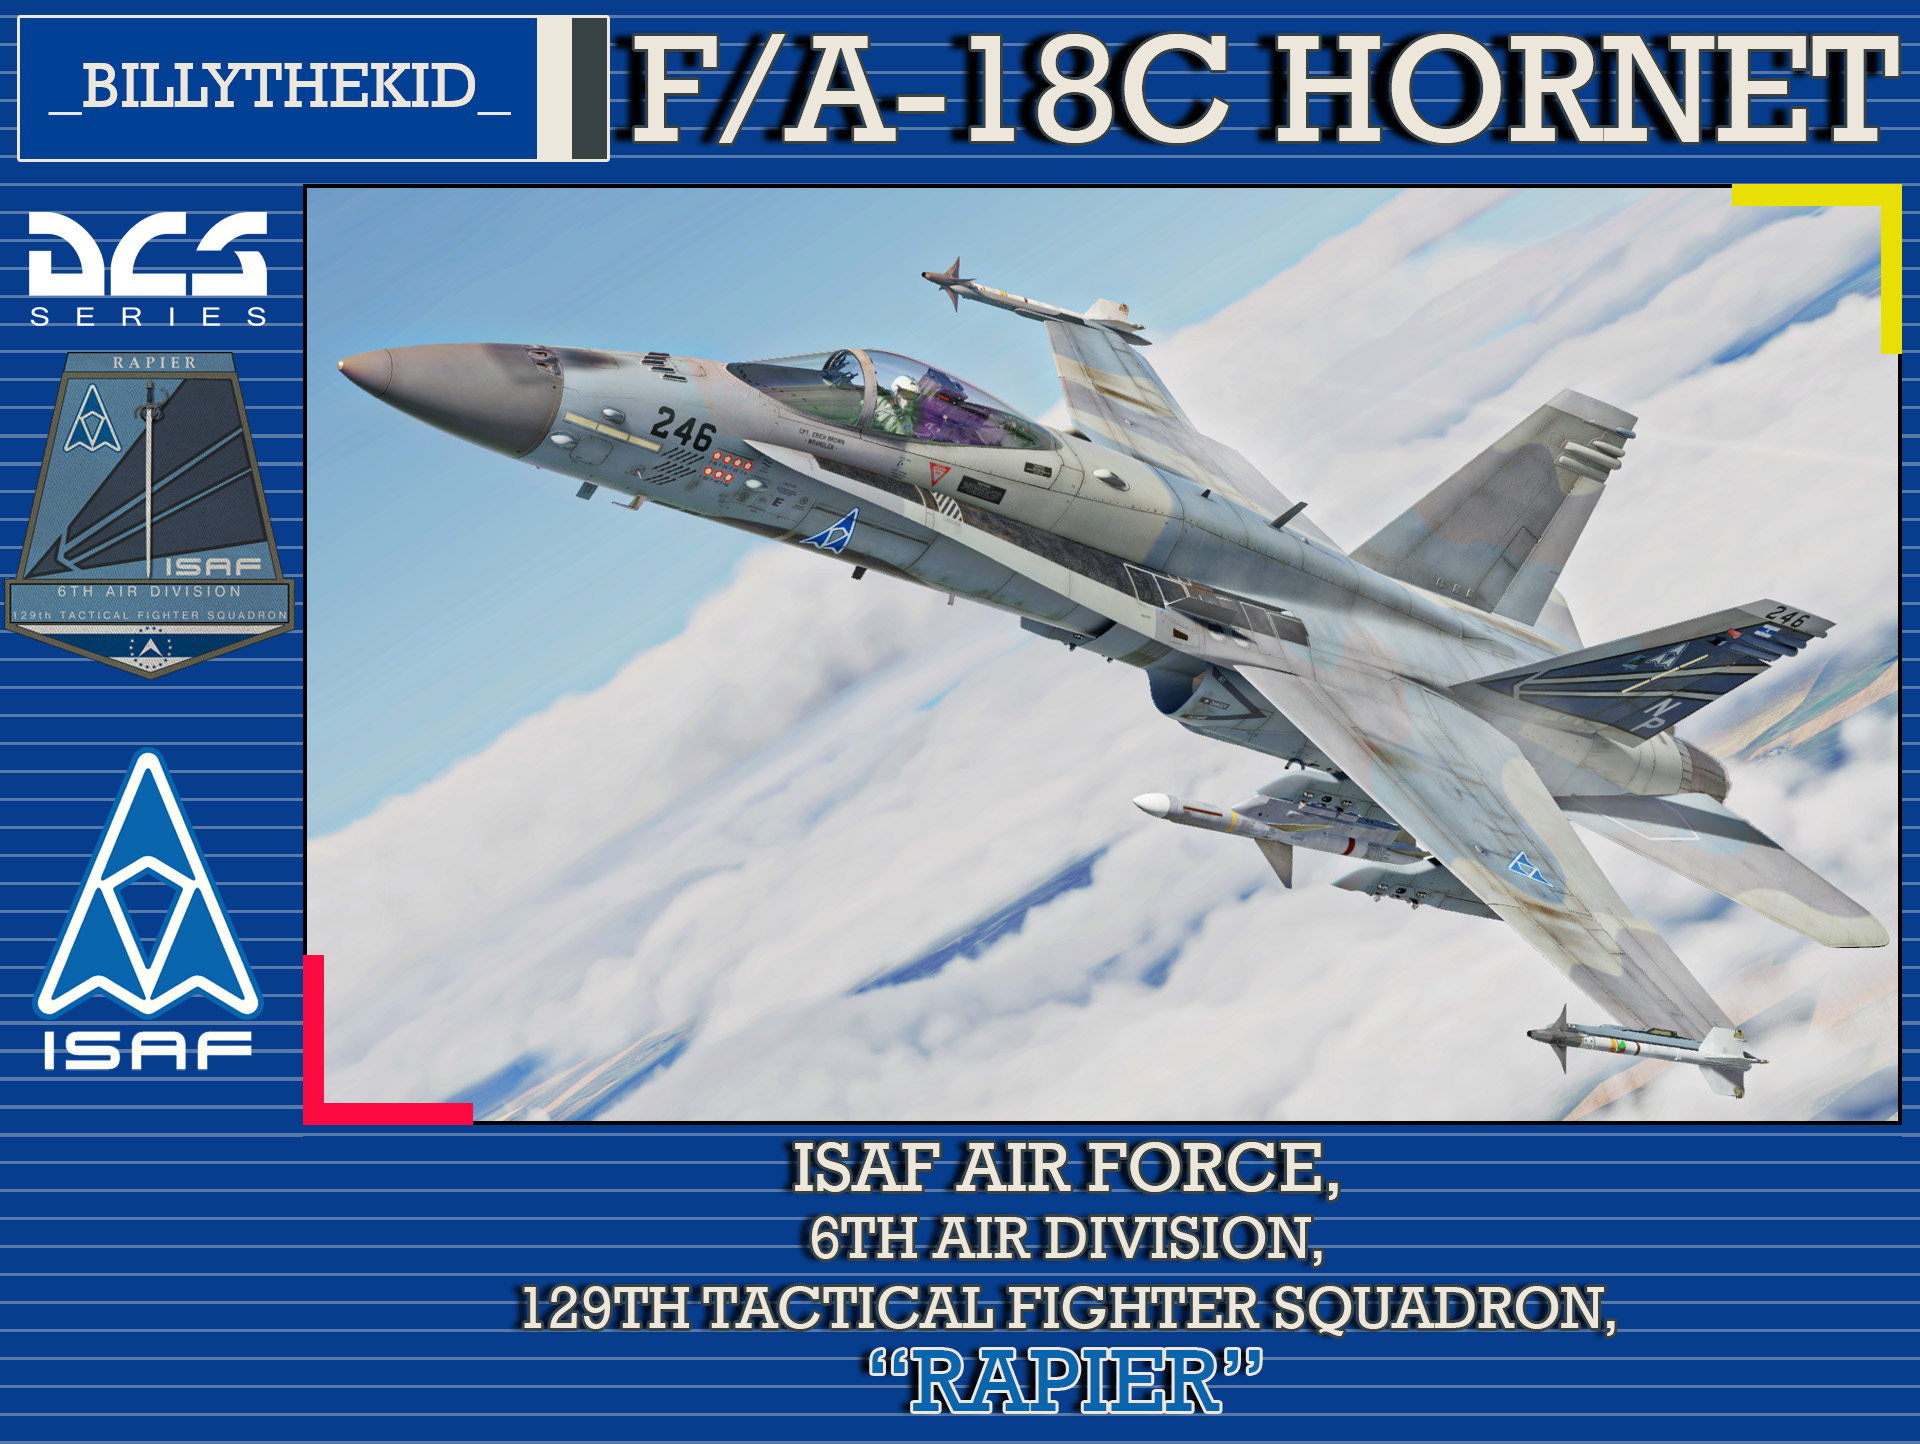 Ace Combat - ISAF Air Force - 6th Air Division - 129th Tactical Fighter Squadron "Rapier" F/A-18C Hornet